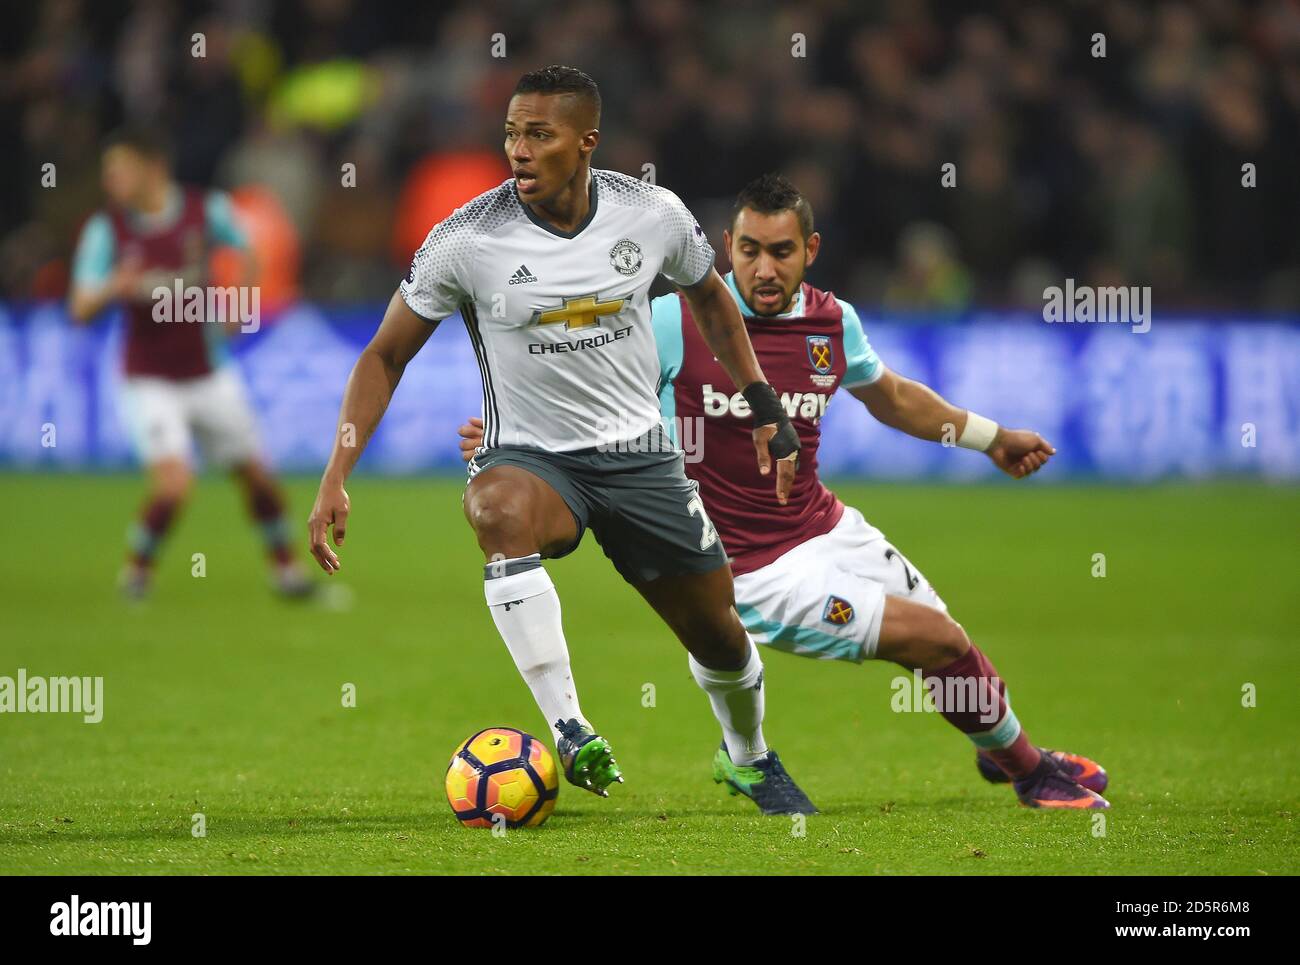 Manchester United's Luis Antonio Valencia (left) and West Ham United's Dimitri Payet in action Stock Photo